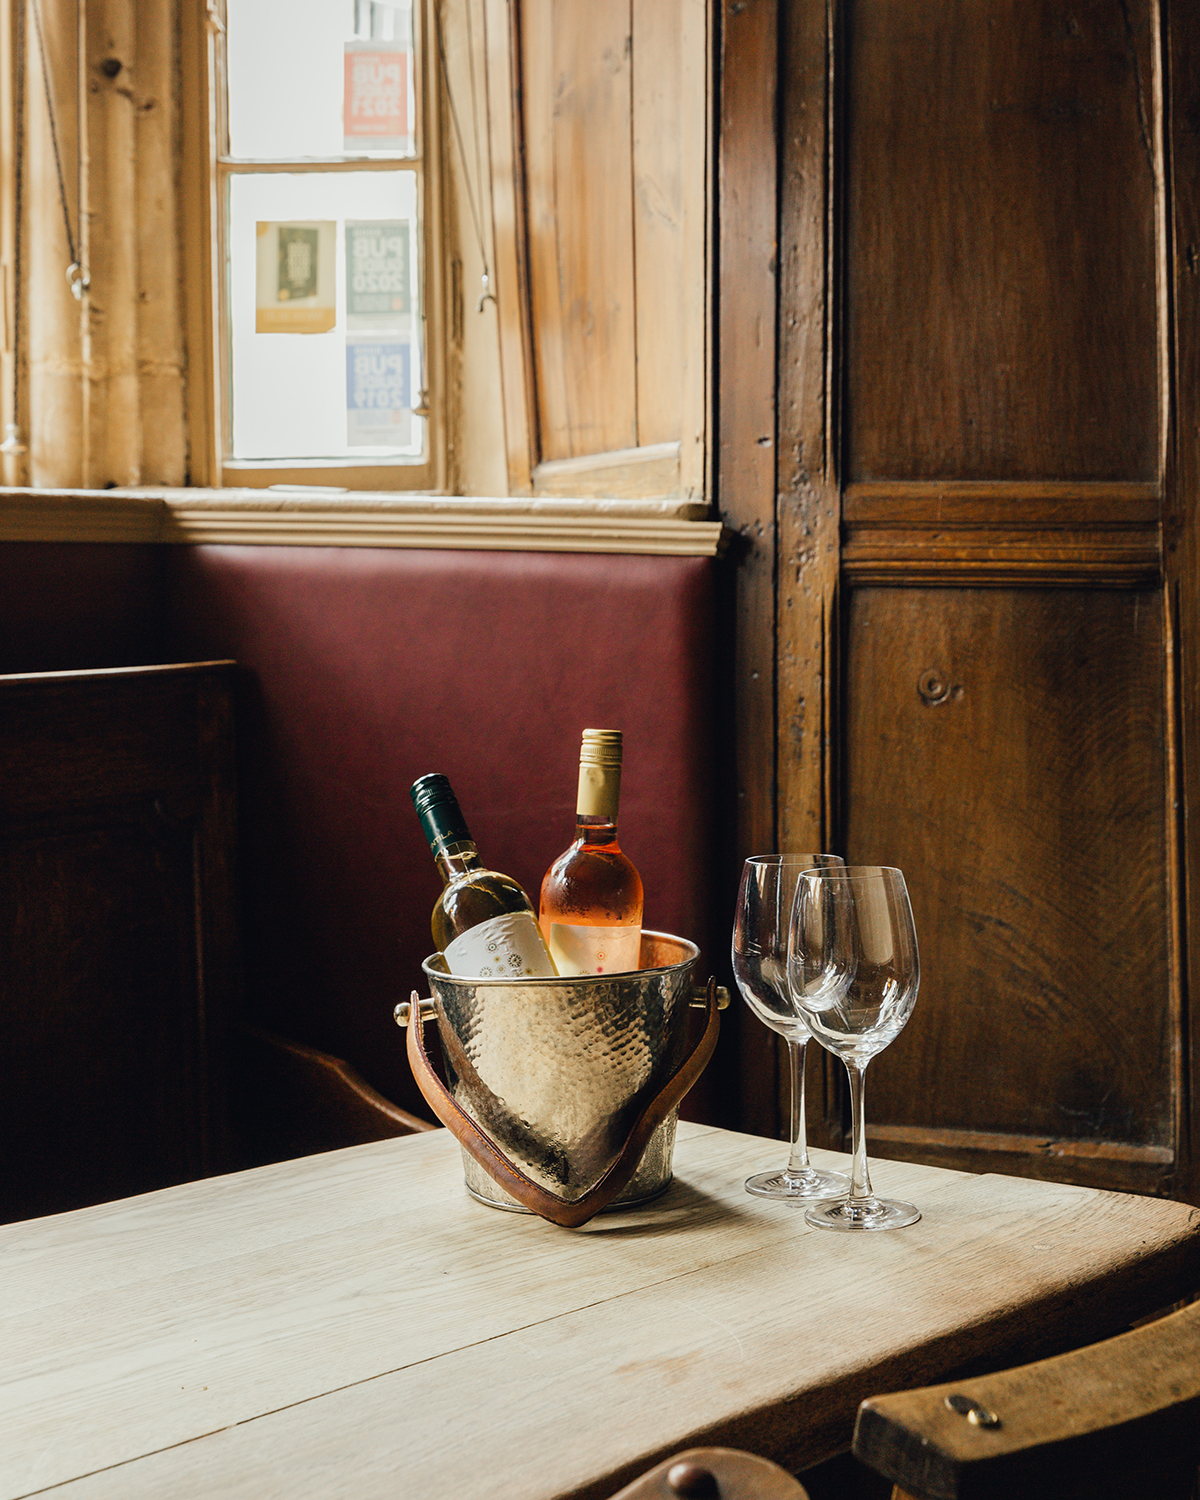 Enjoy A Bottle On Us at The Crown! This January & February